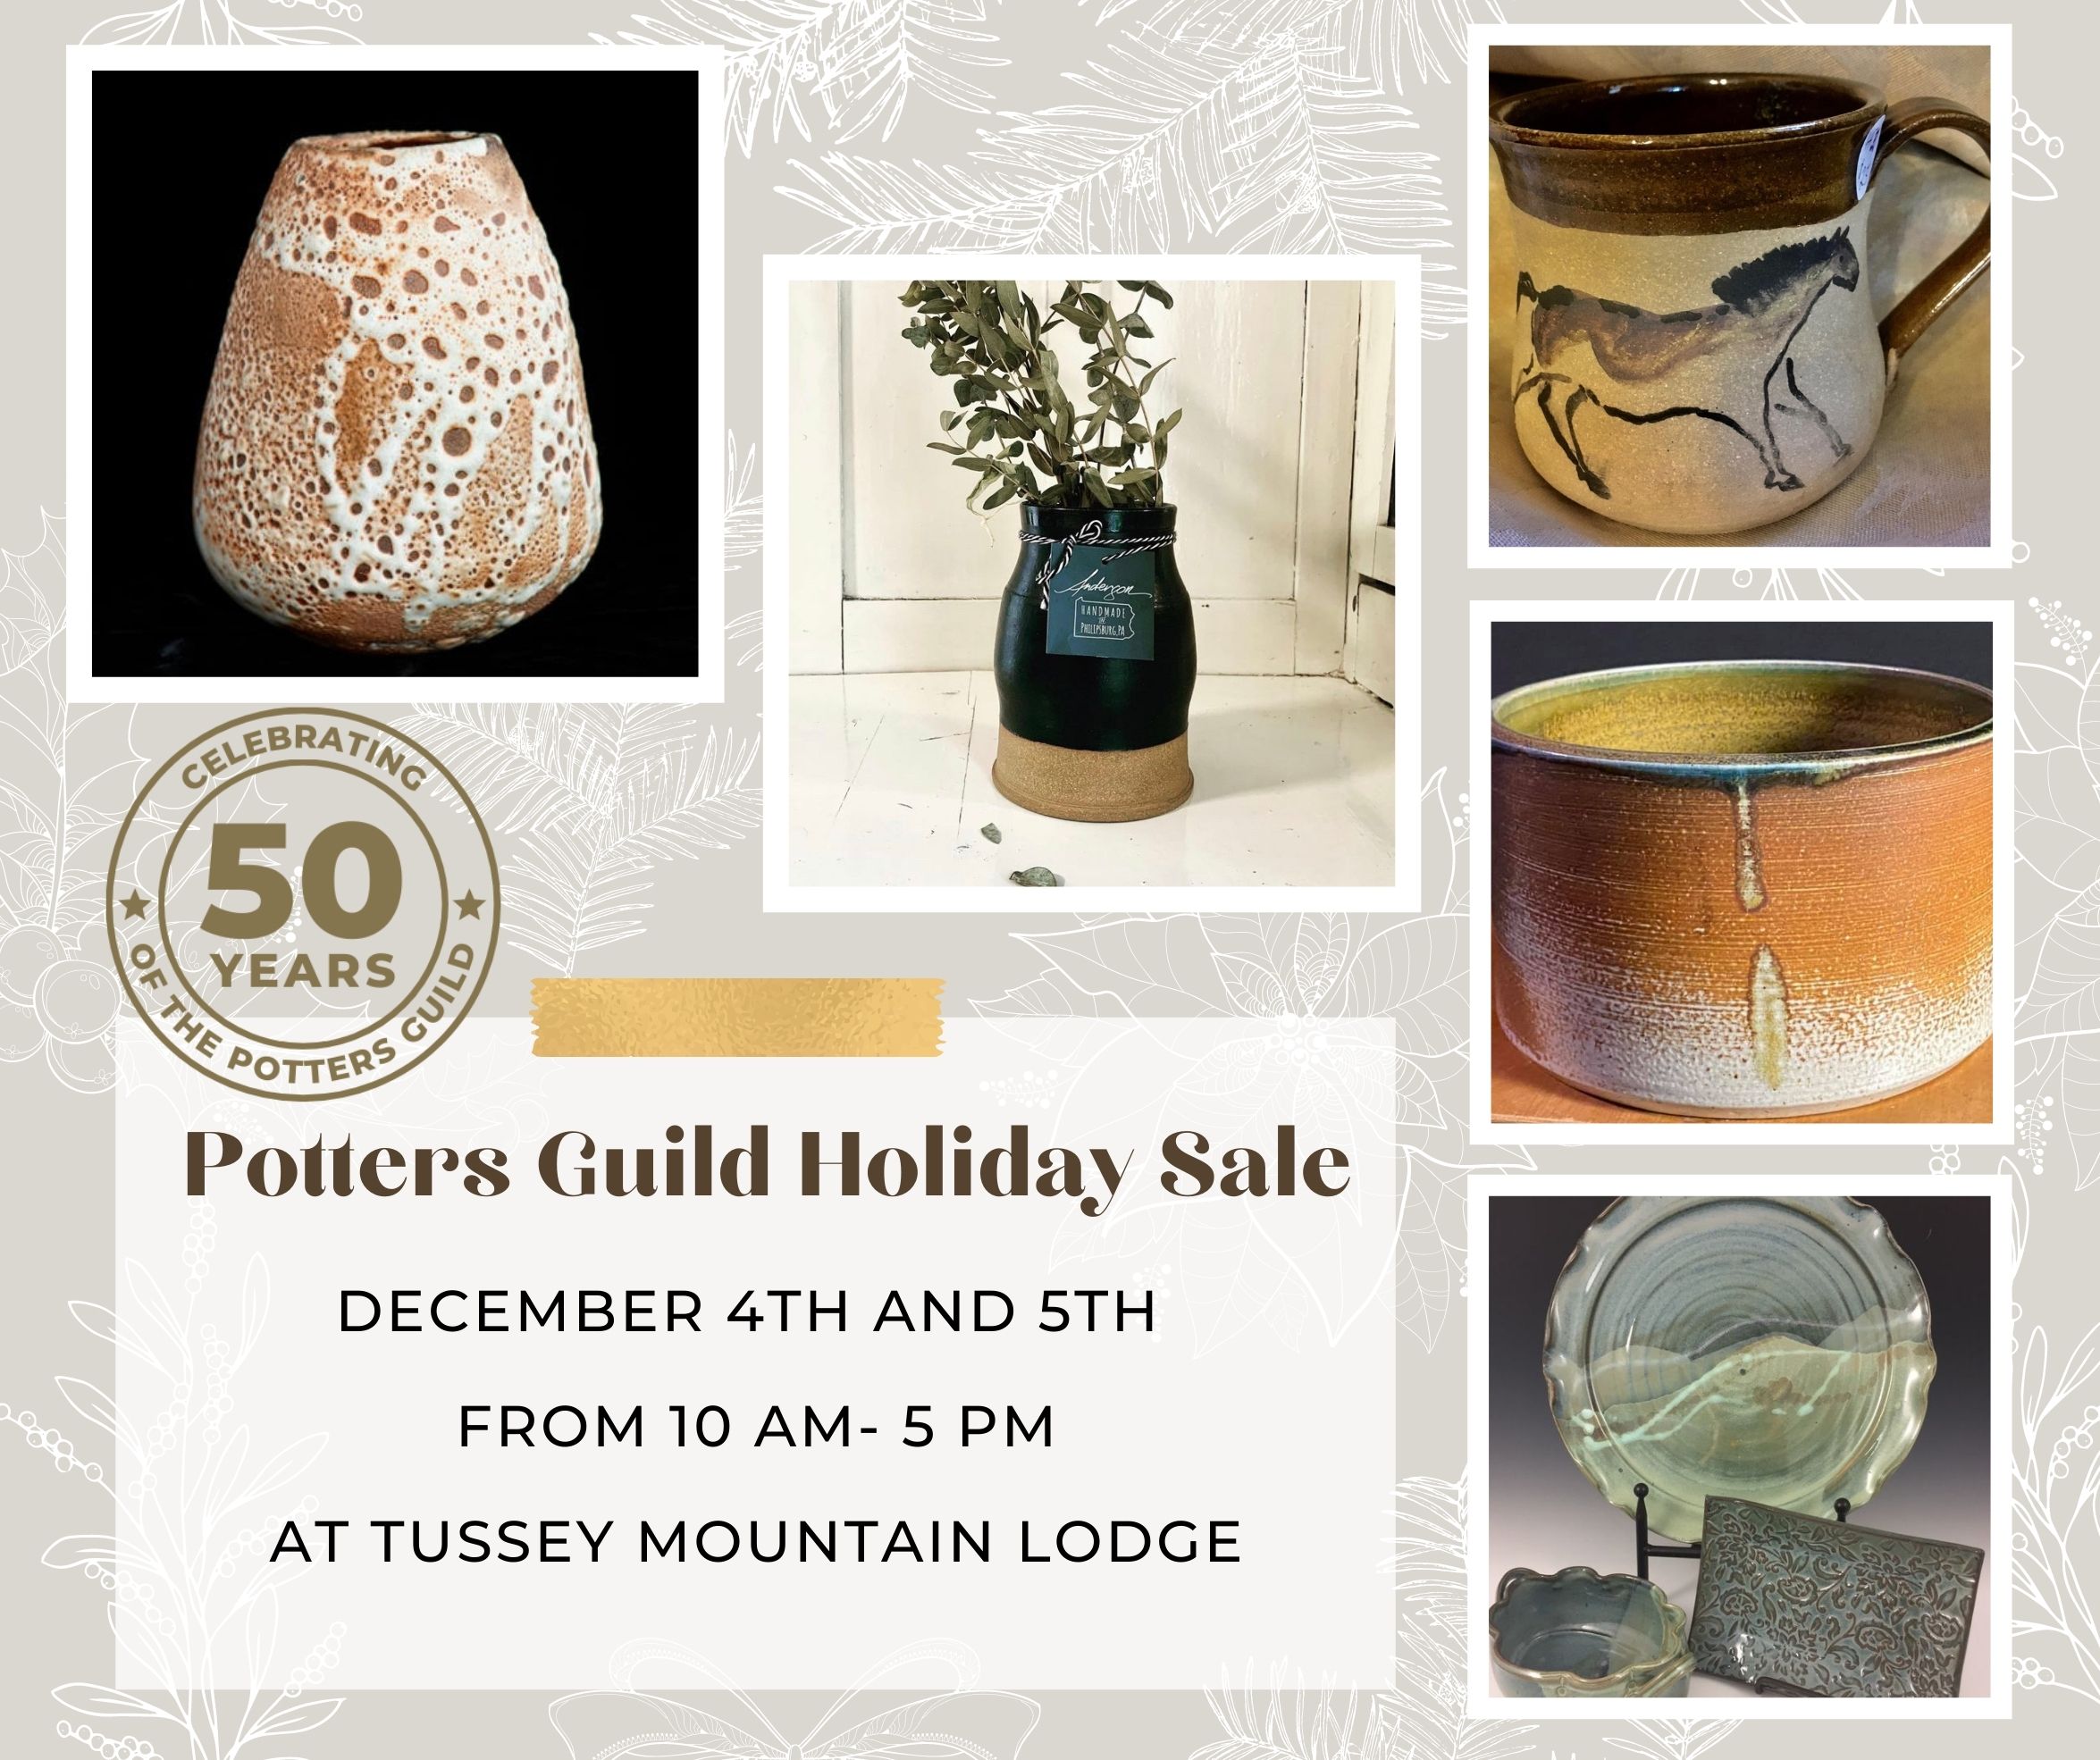 Potters Guild 50th Anniversary Holiday Sale